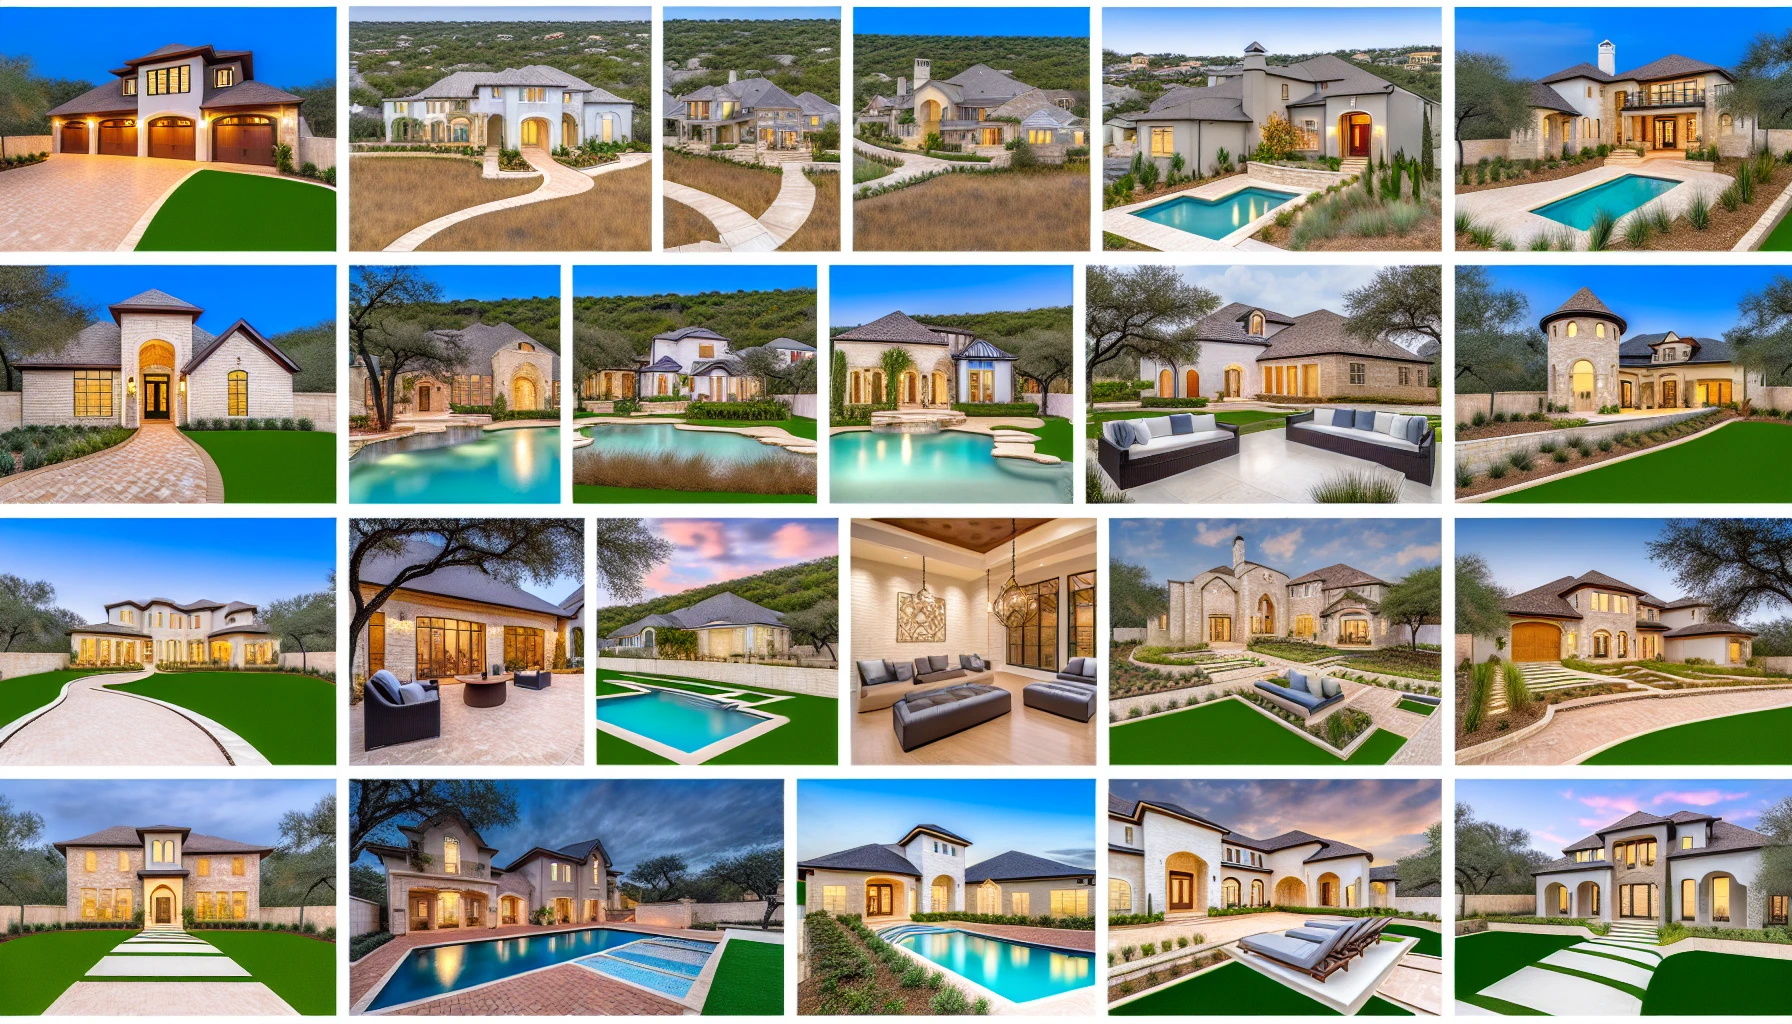 Real estate options in Barton Creek and Spanish Oaks